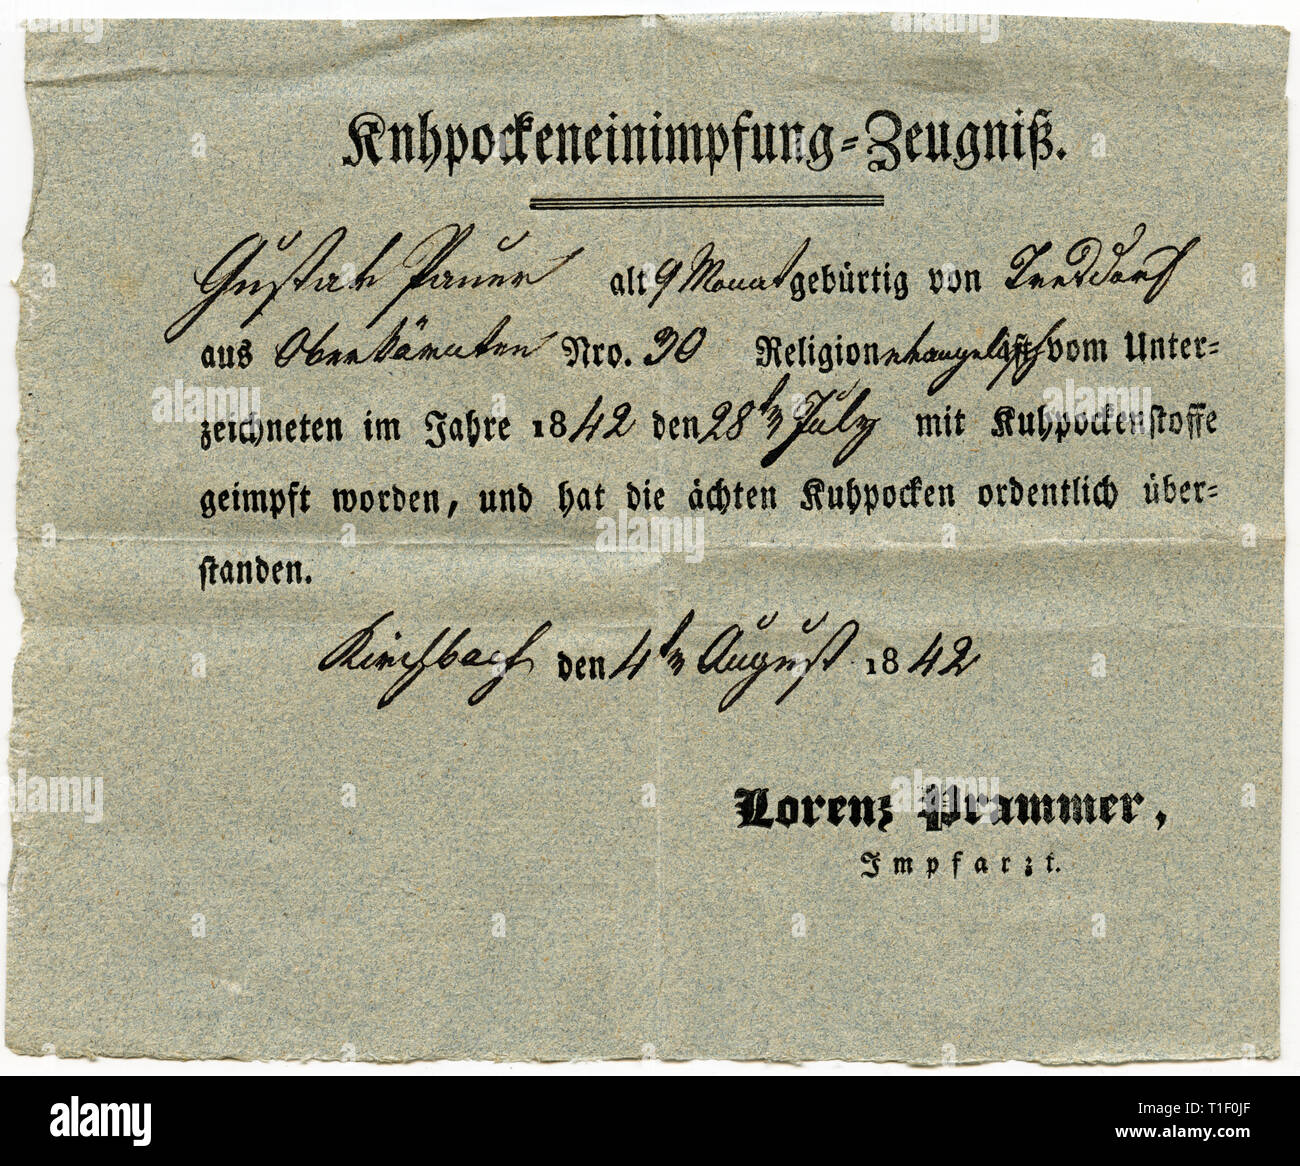 Austria, Carinthia / Kärnten, vaccination certificate about smallpox vaccination, written in historical writing, in a kind of Sütterlin font, the German cancelleresca (in German called Kanzleischrift). The document is from 1842. Autriche, Carinthie, certificat de vaccination, vaccination contre la variole, 1842., Additional-Rights-Clearance-Info-Not-Available Stock Photo